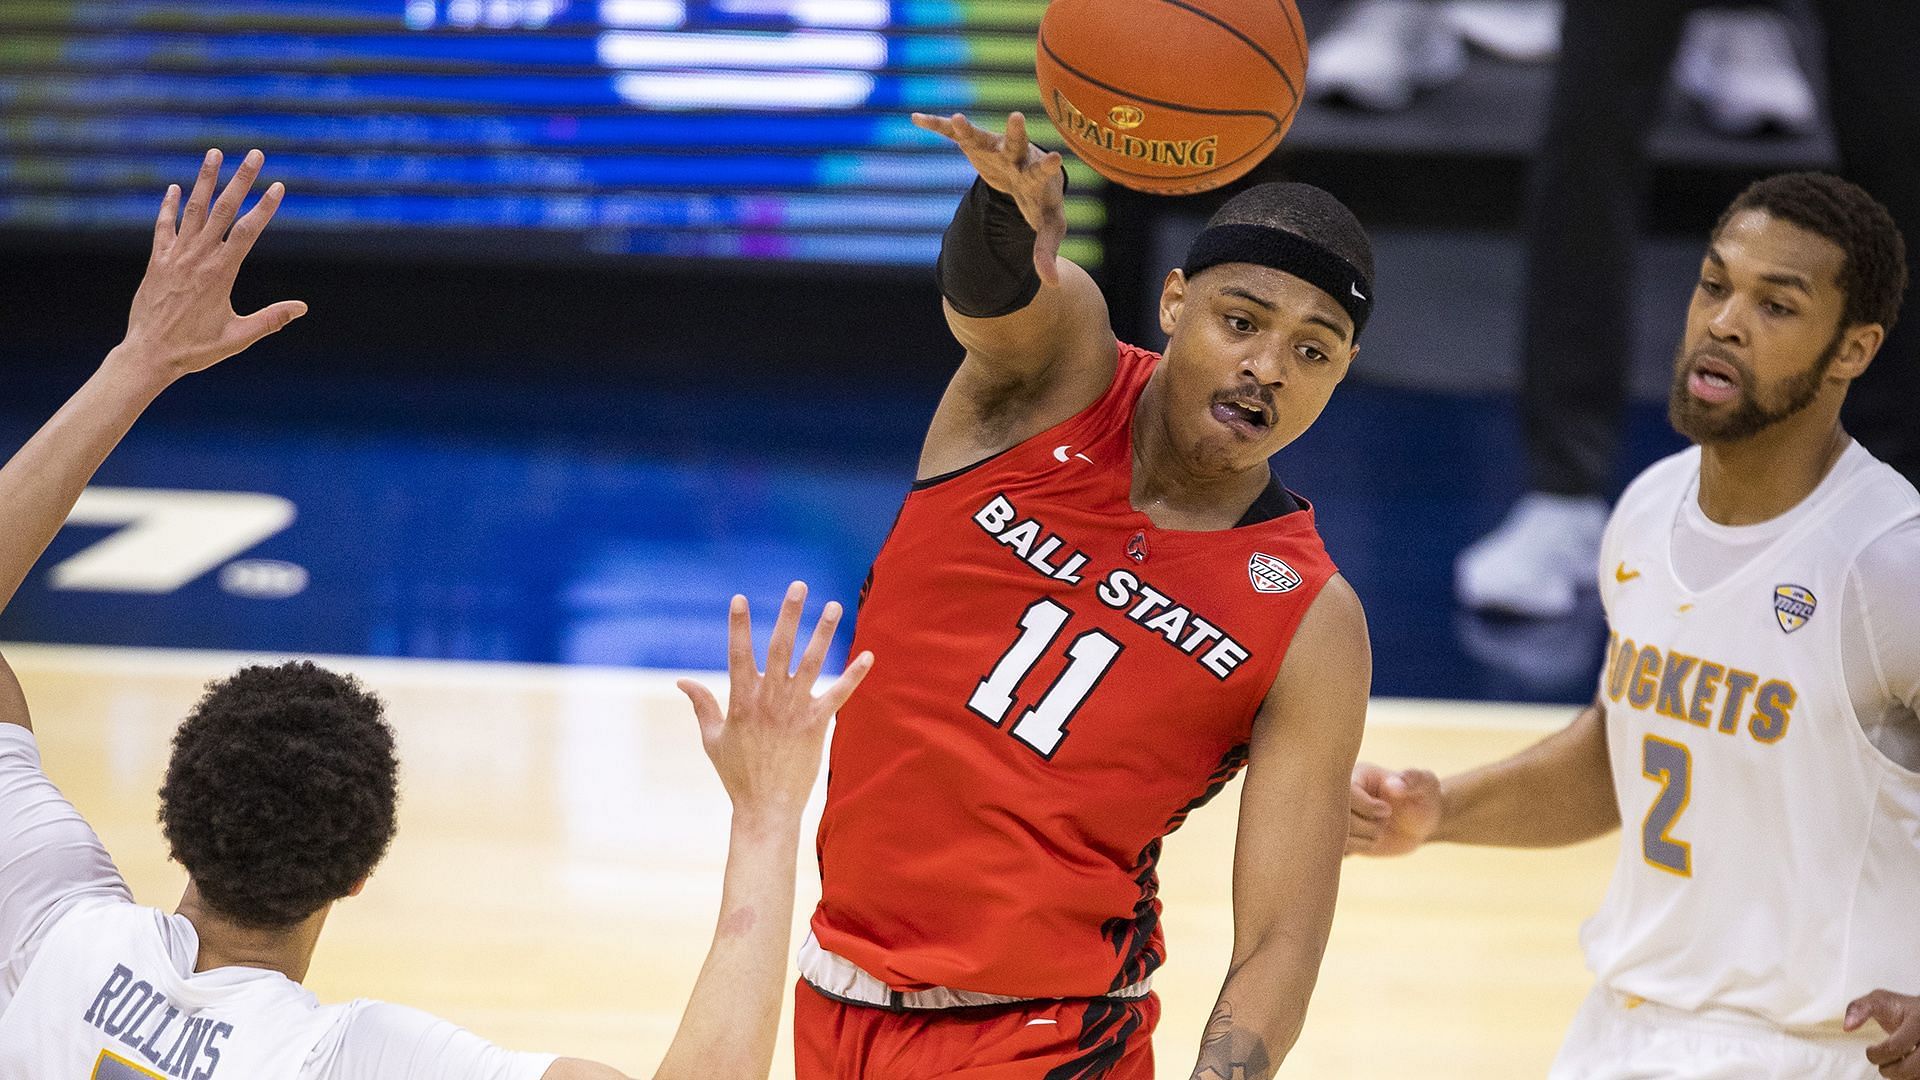 Can Ball State keep their winning streak alive on the road against Ohio?